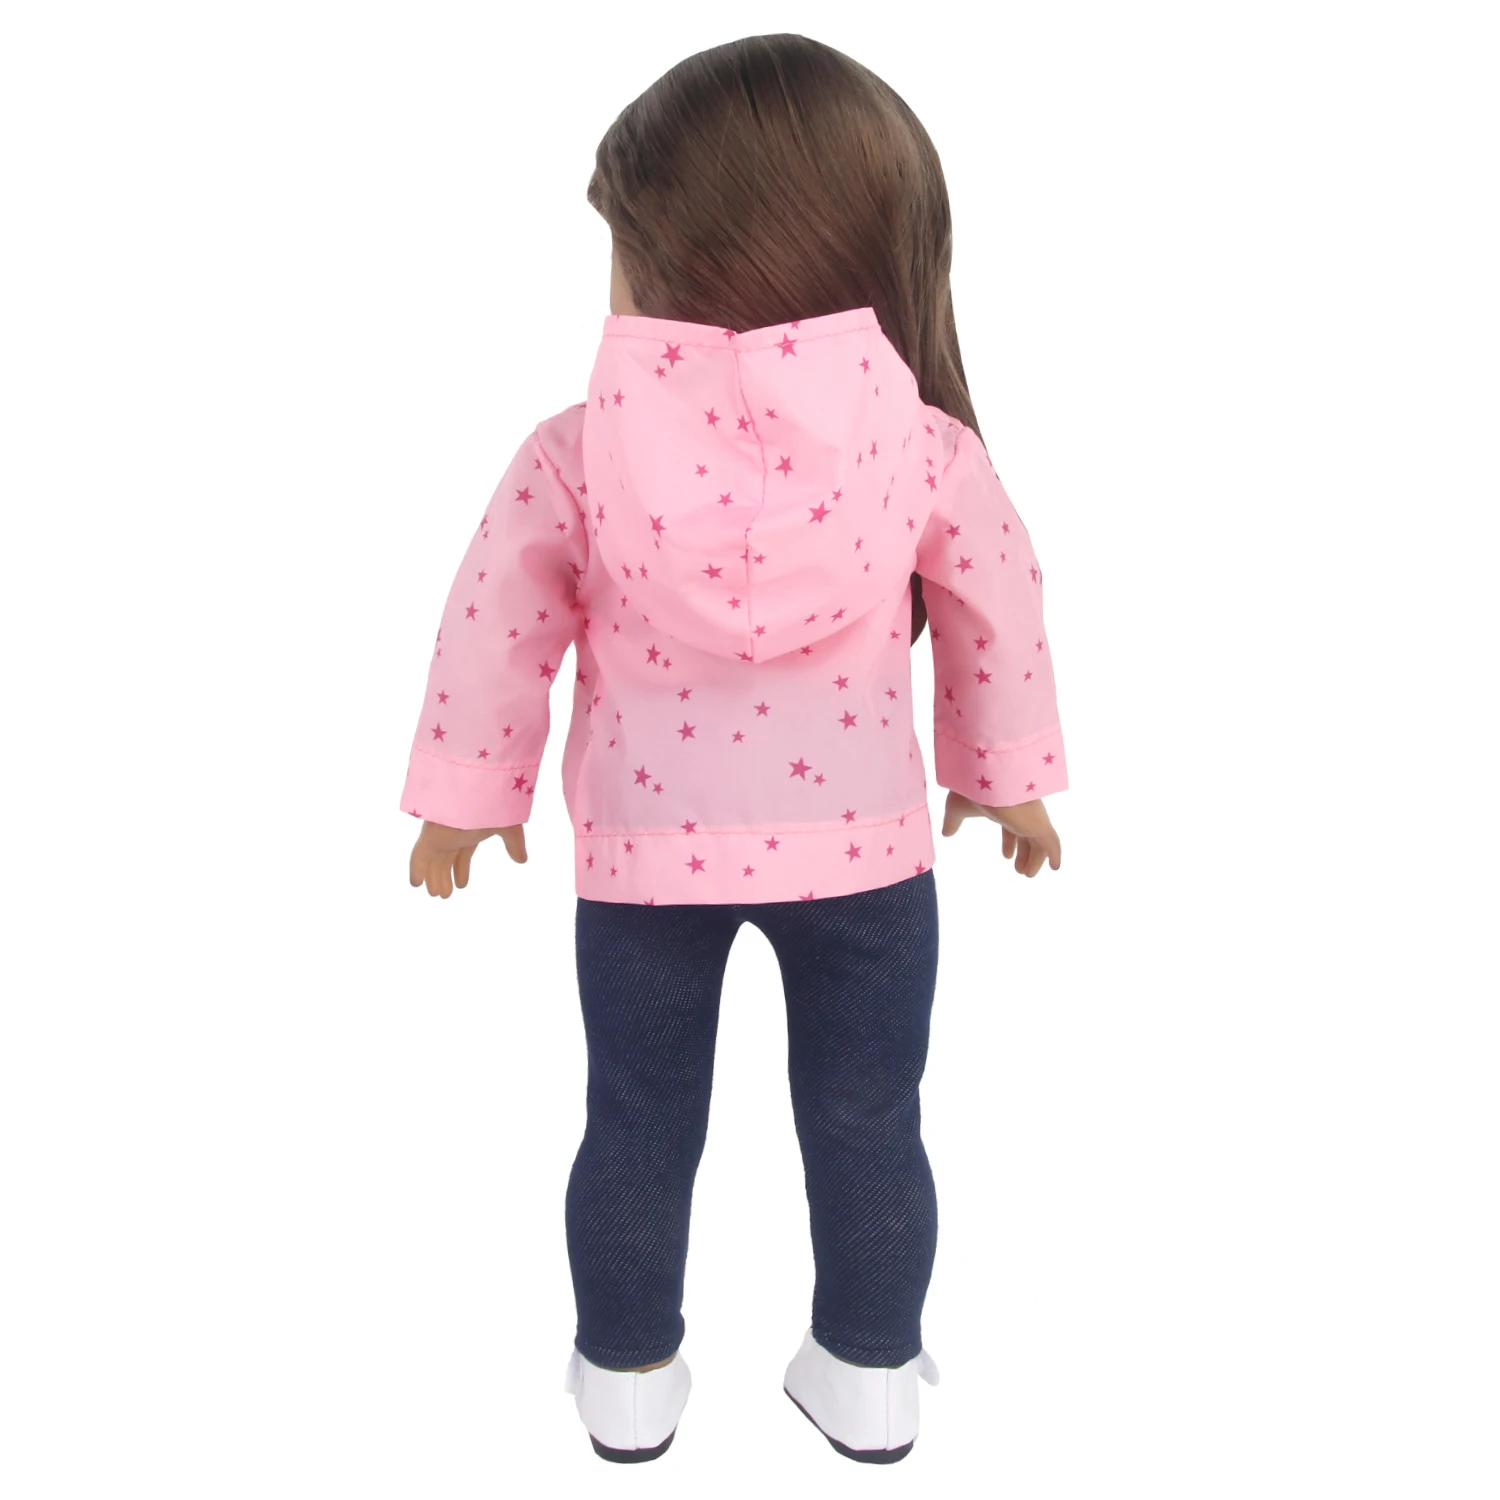 New arrival 18 inch doll clothes American doll girl raincoat sunscreen clothing